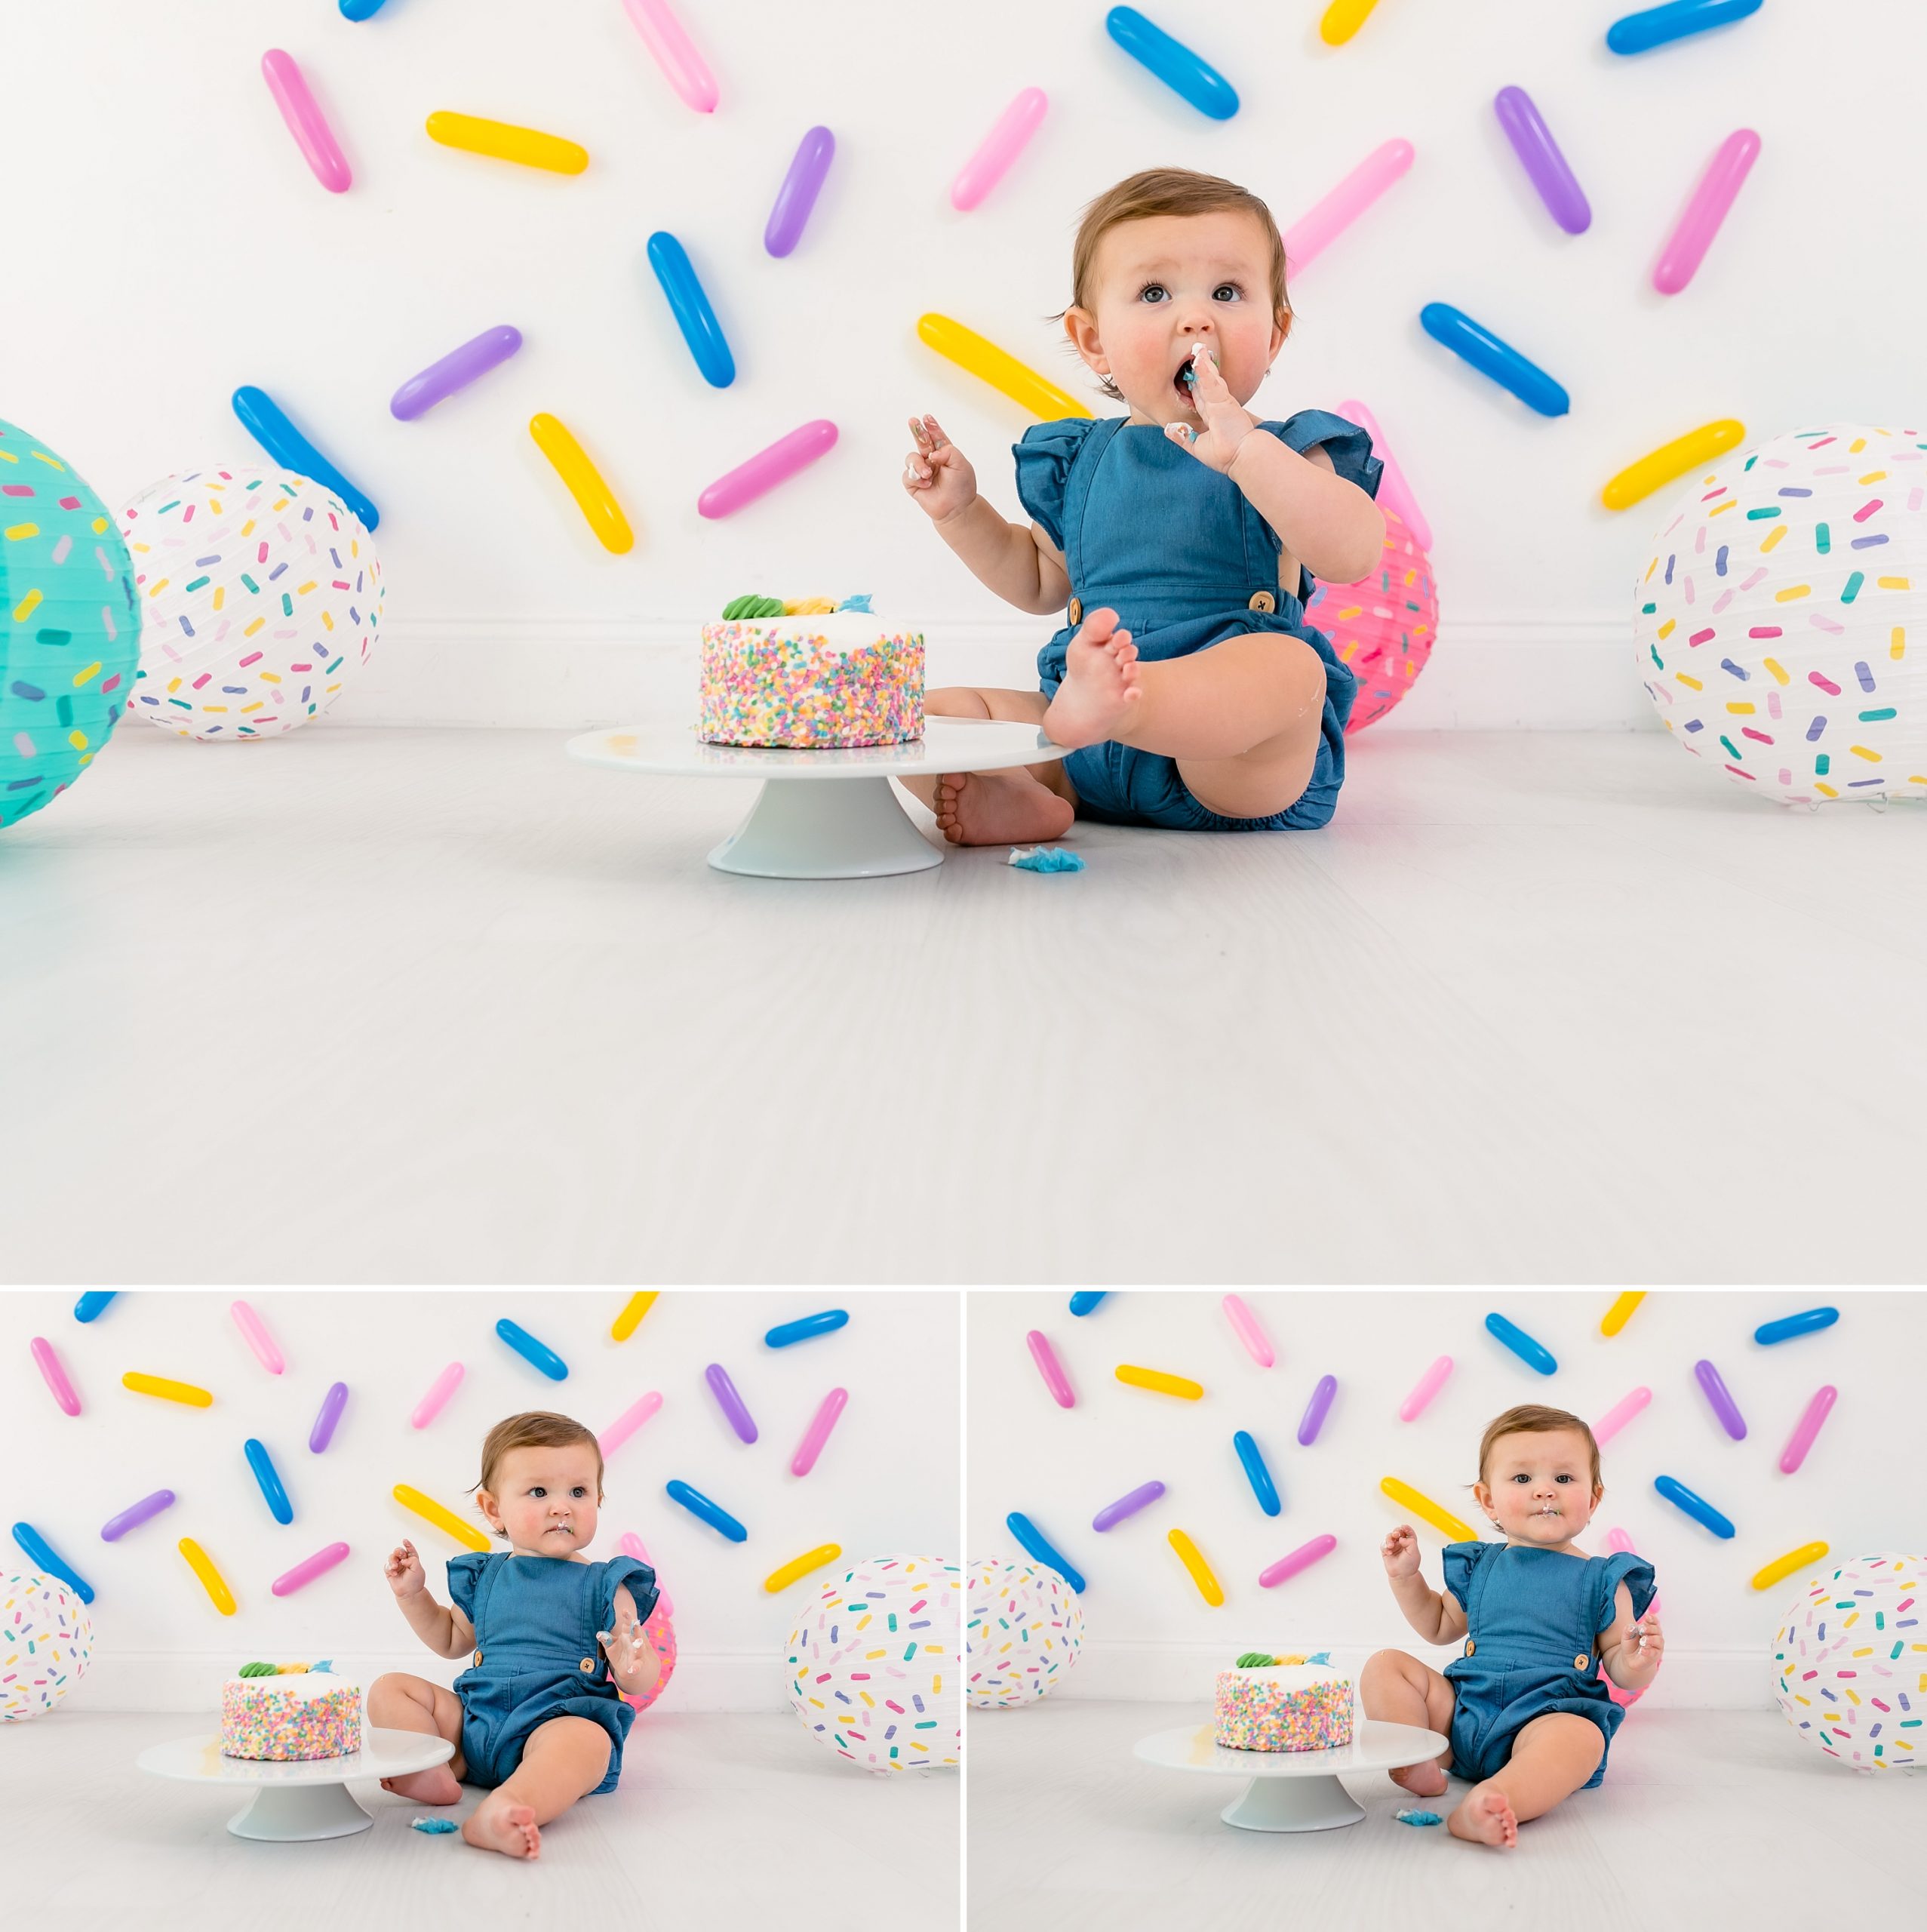 jessica rambo photography, cake smash session, fort worth family photographer, fort worth children photographer, cake smash, one year old session, donut theme, the lumen room fort worth, fort worth portrait photographer. fort worth portrait photography, children portraits, kids portraits, fun photography, creative photography ideas